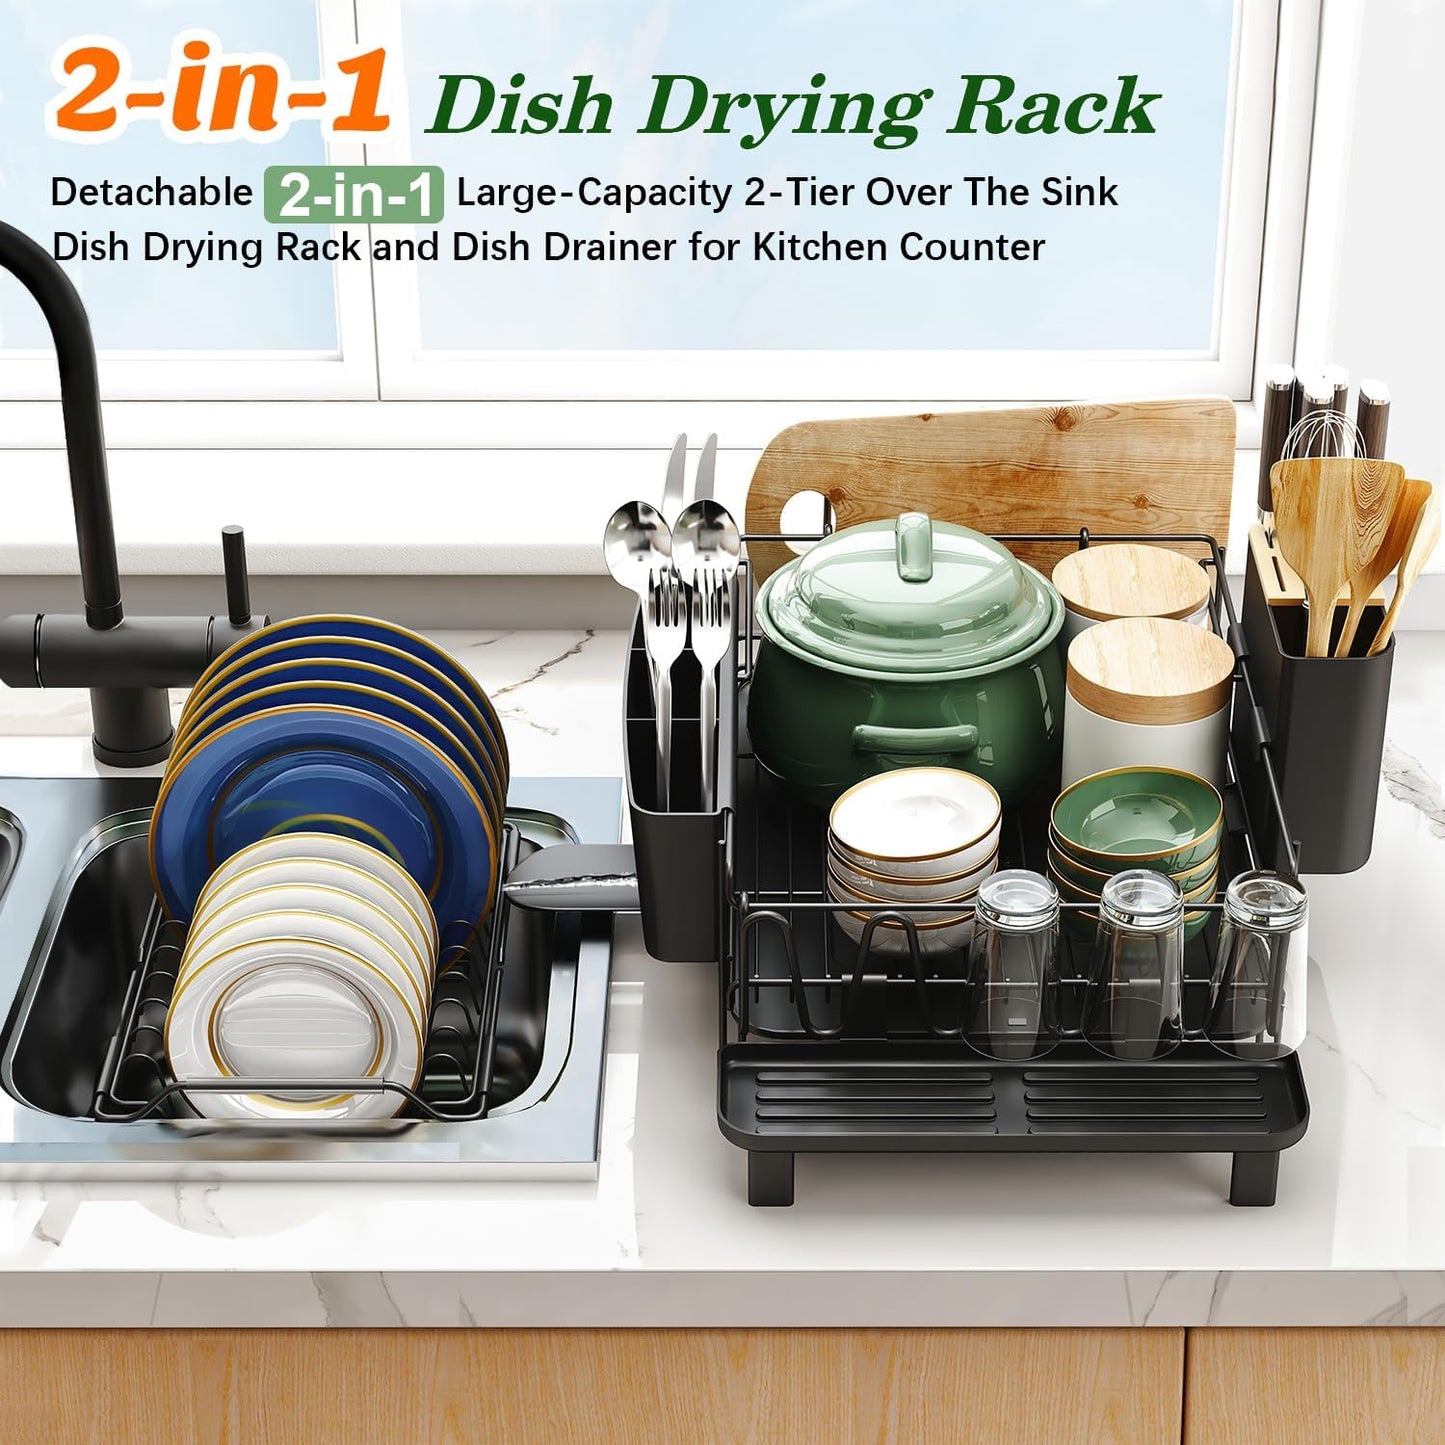 Large Dish Drying Rack with Drainboard Set, Stainless Steel Detachable 2-In-1 Large-Capacity 2-Tier over the Sink Anti-Rust Dish Drying Rack and Dish Drainer for Kitchen Counter